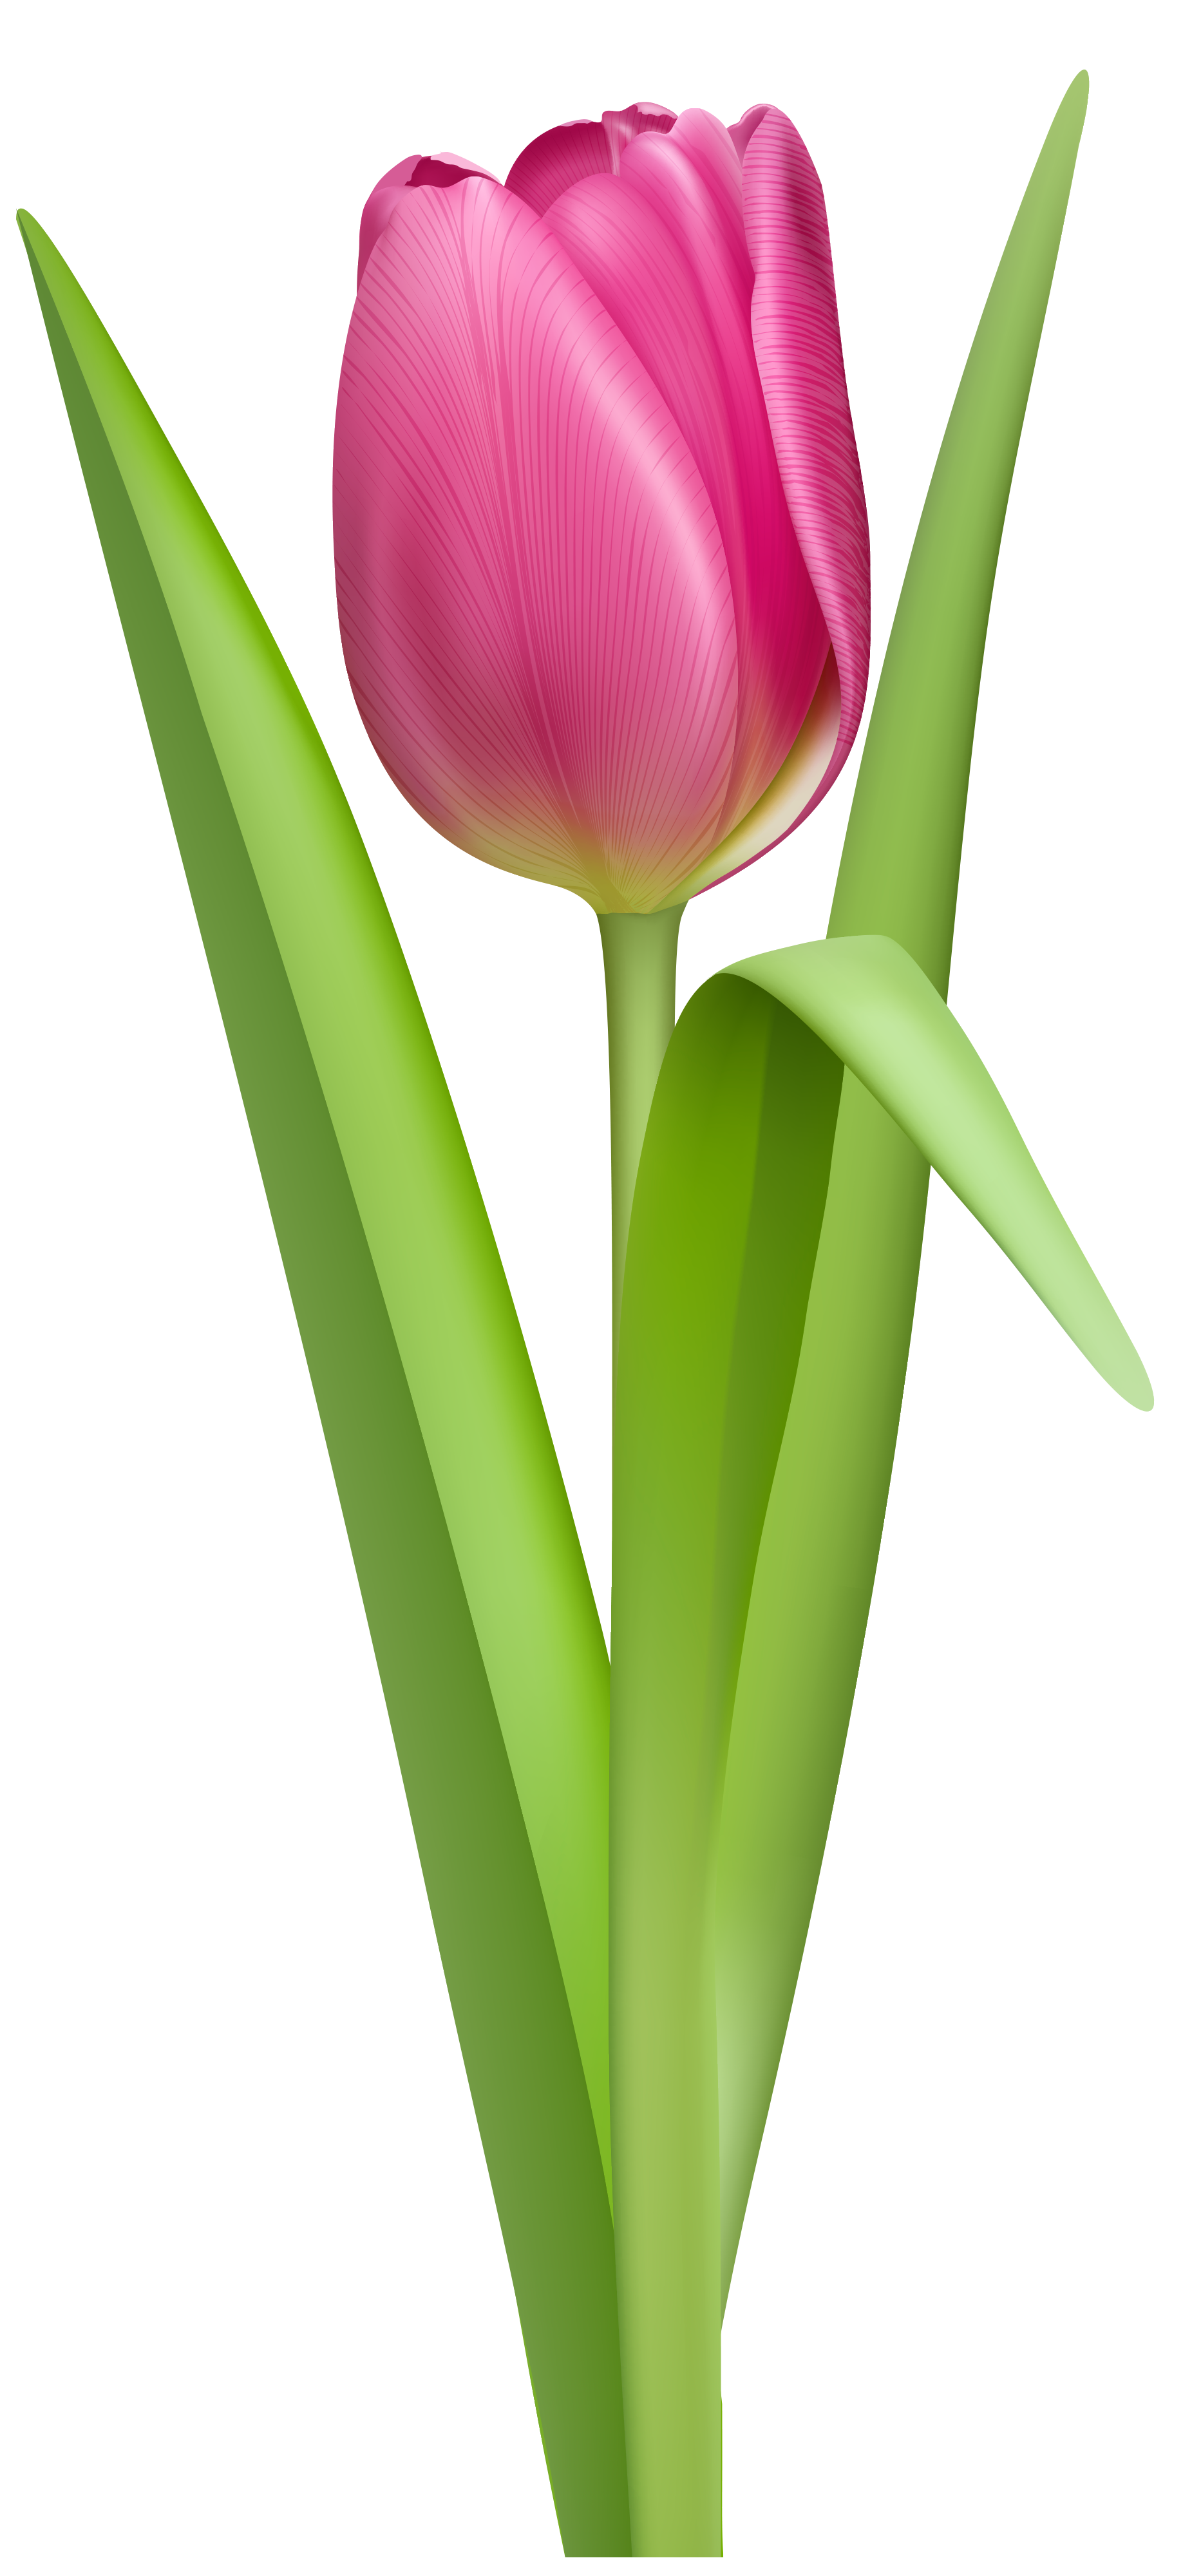 Clipart flowers tulip. No background flower cliparts